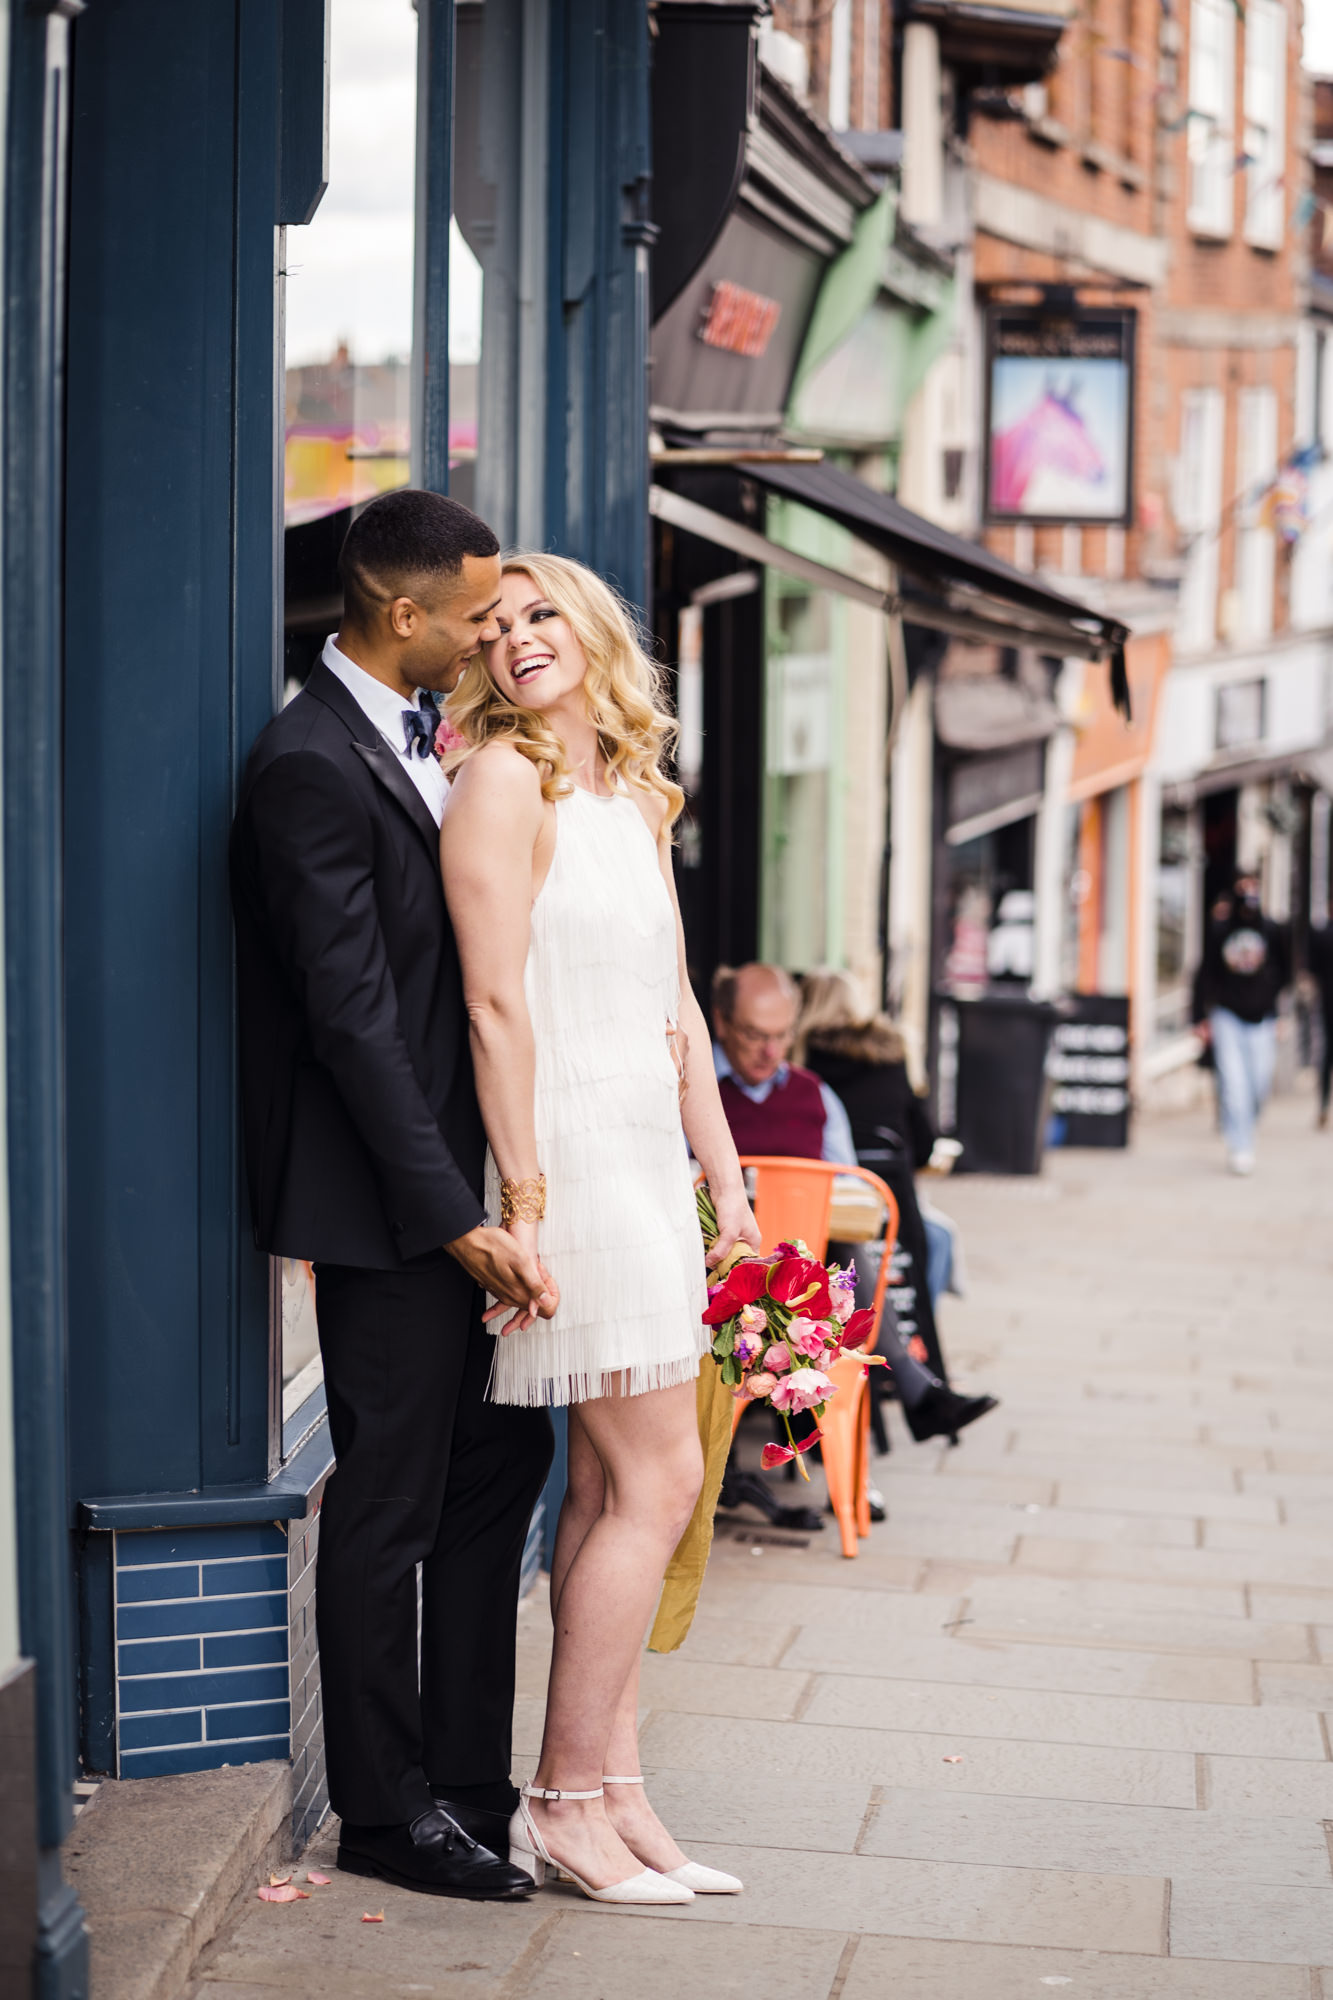 modern wedding couple portrait of bride and groom on busy city street